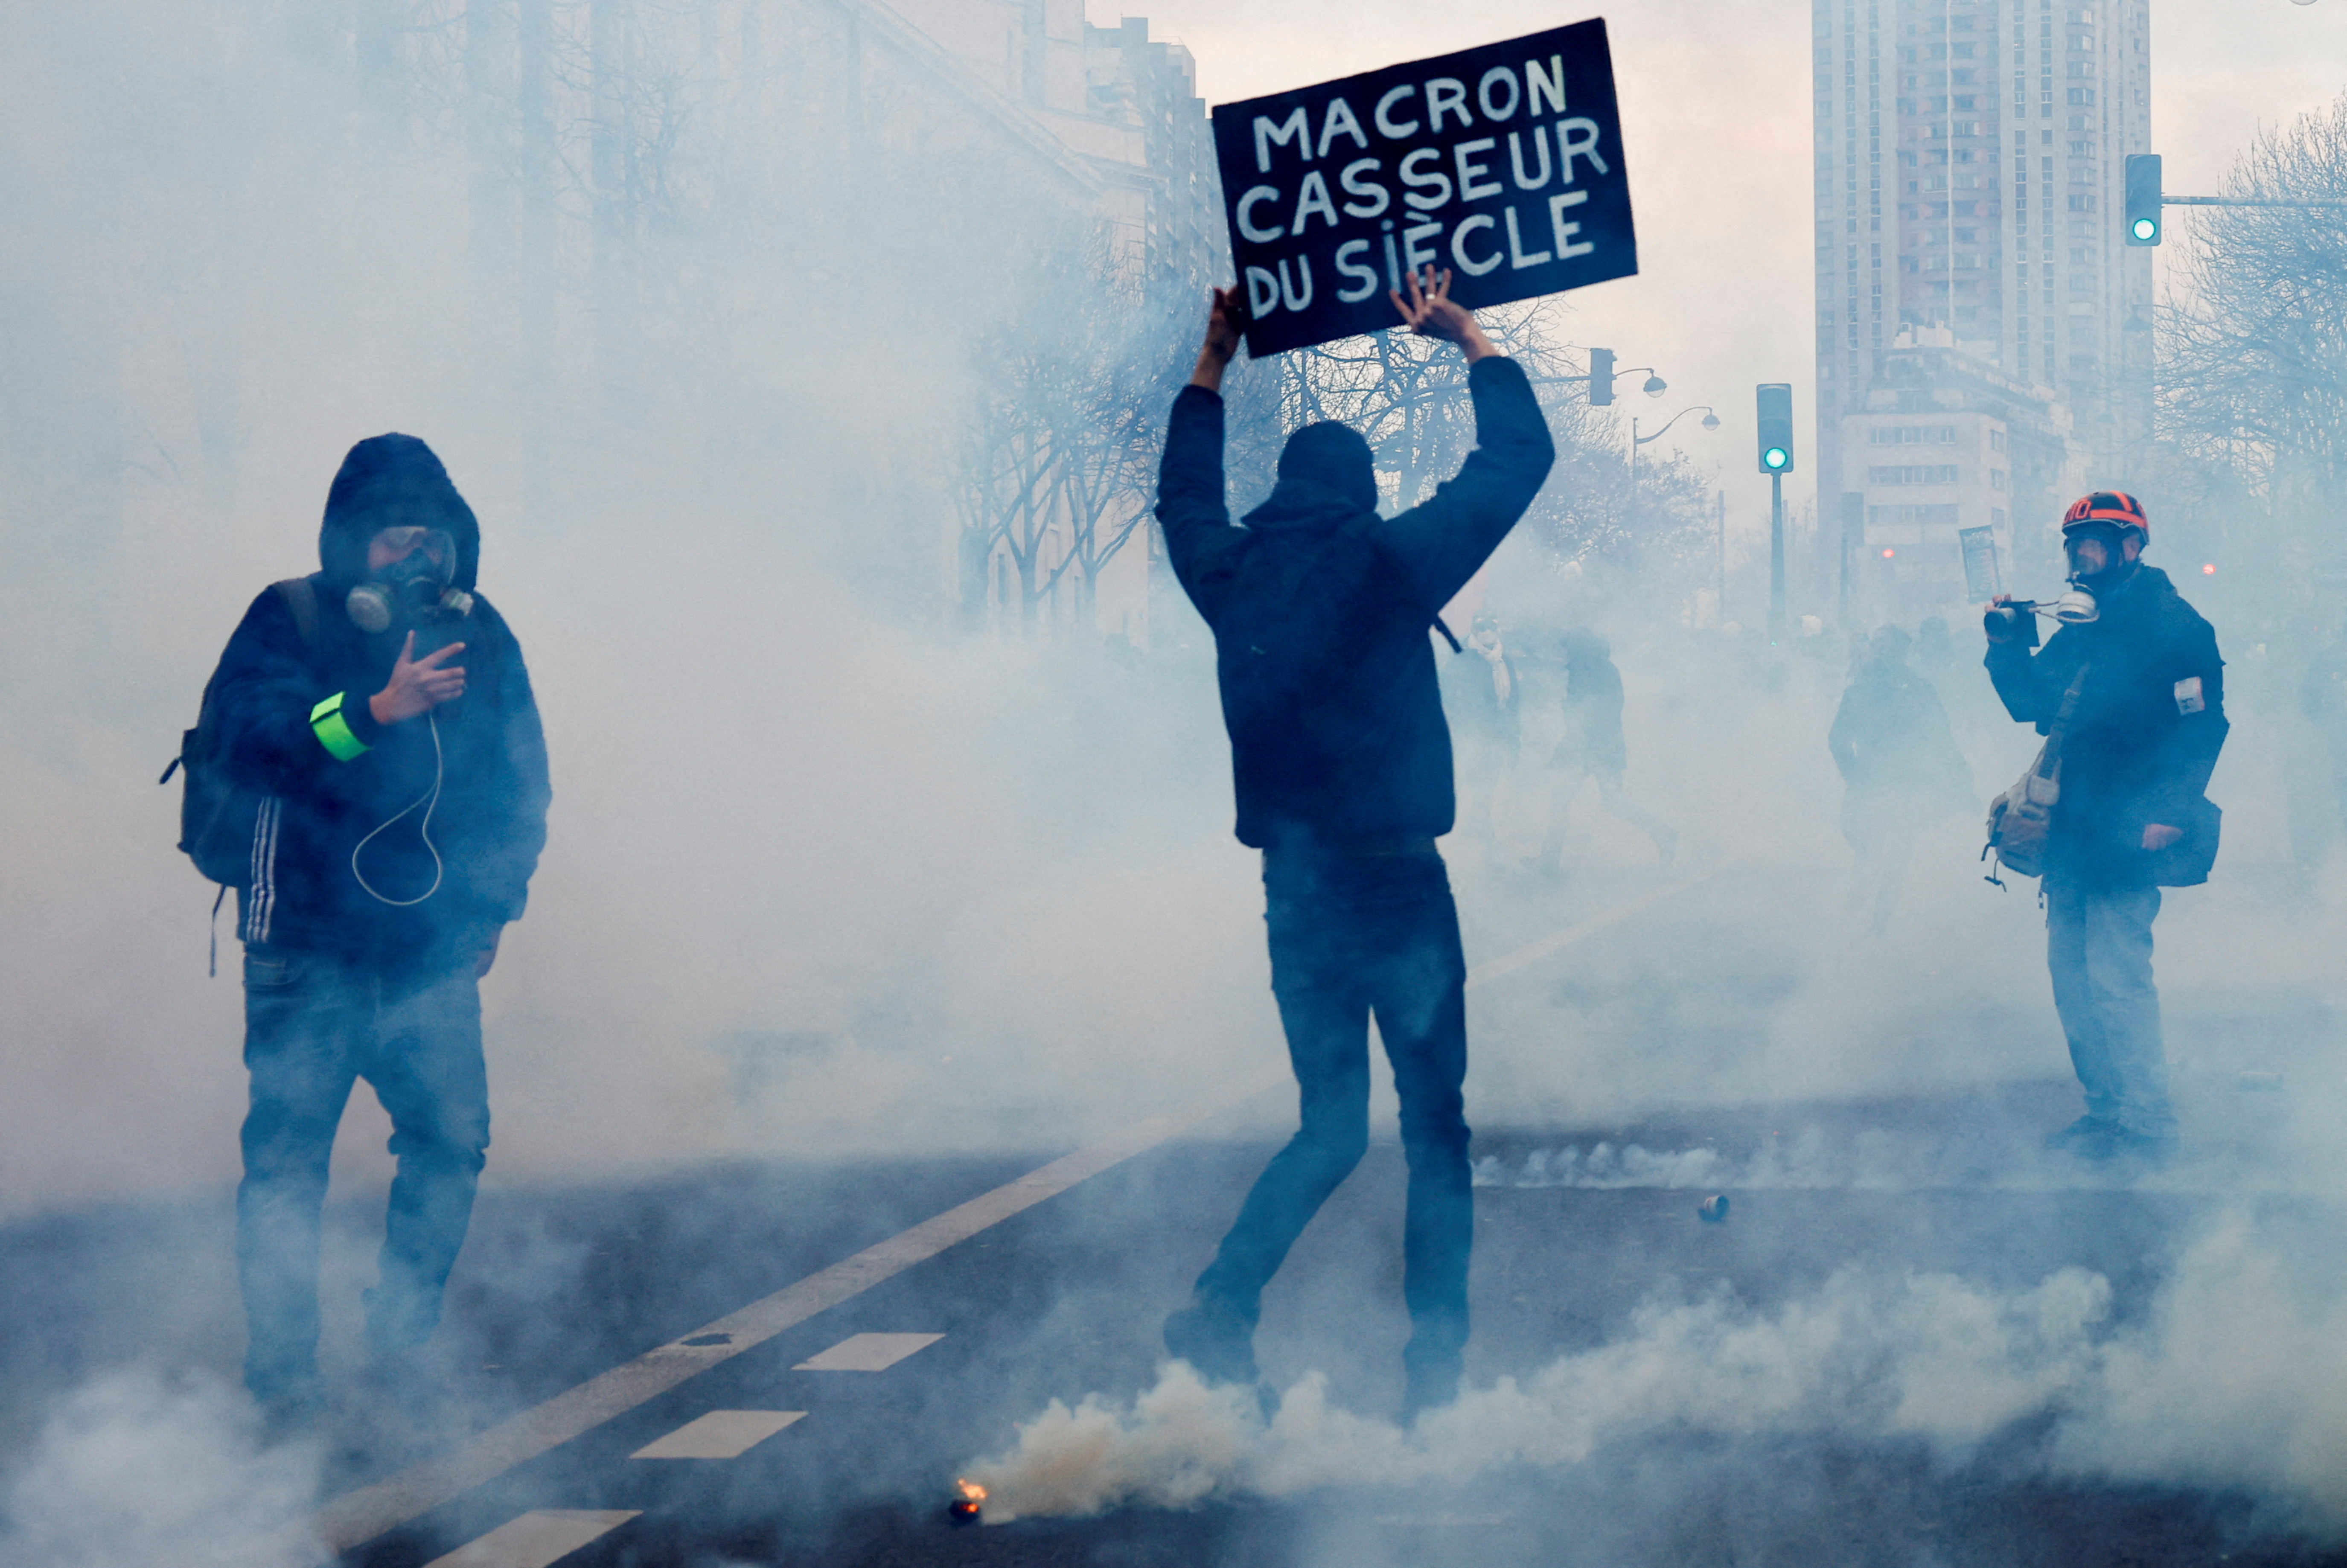 Sixth day of national protest in France against the pension reform